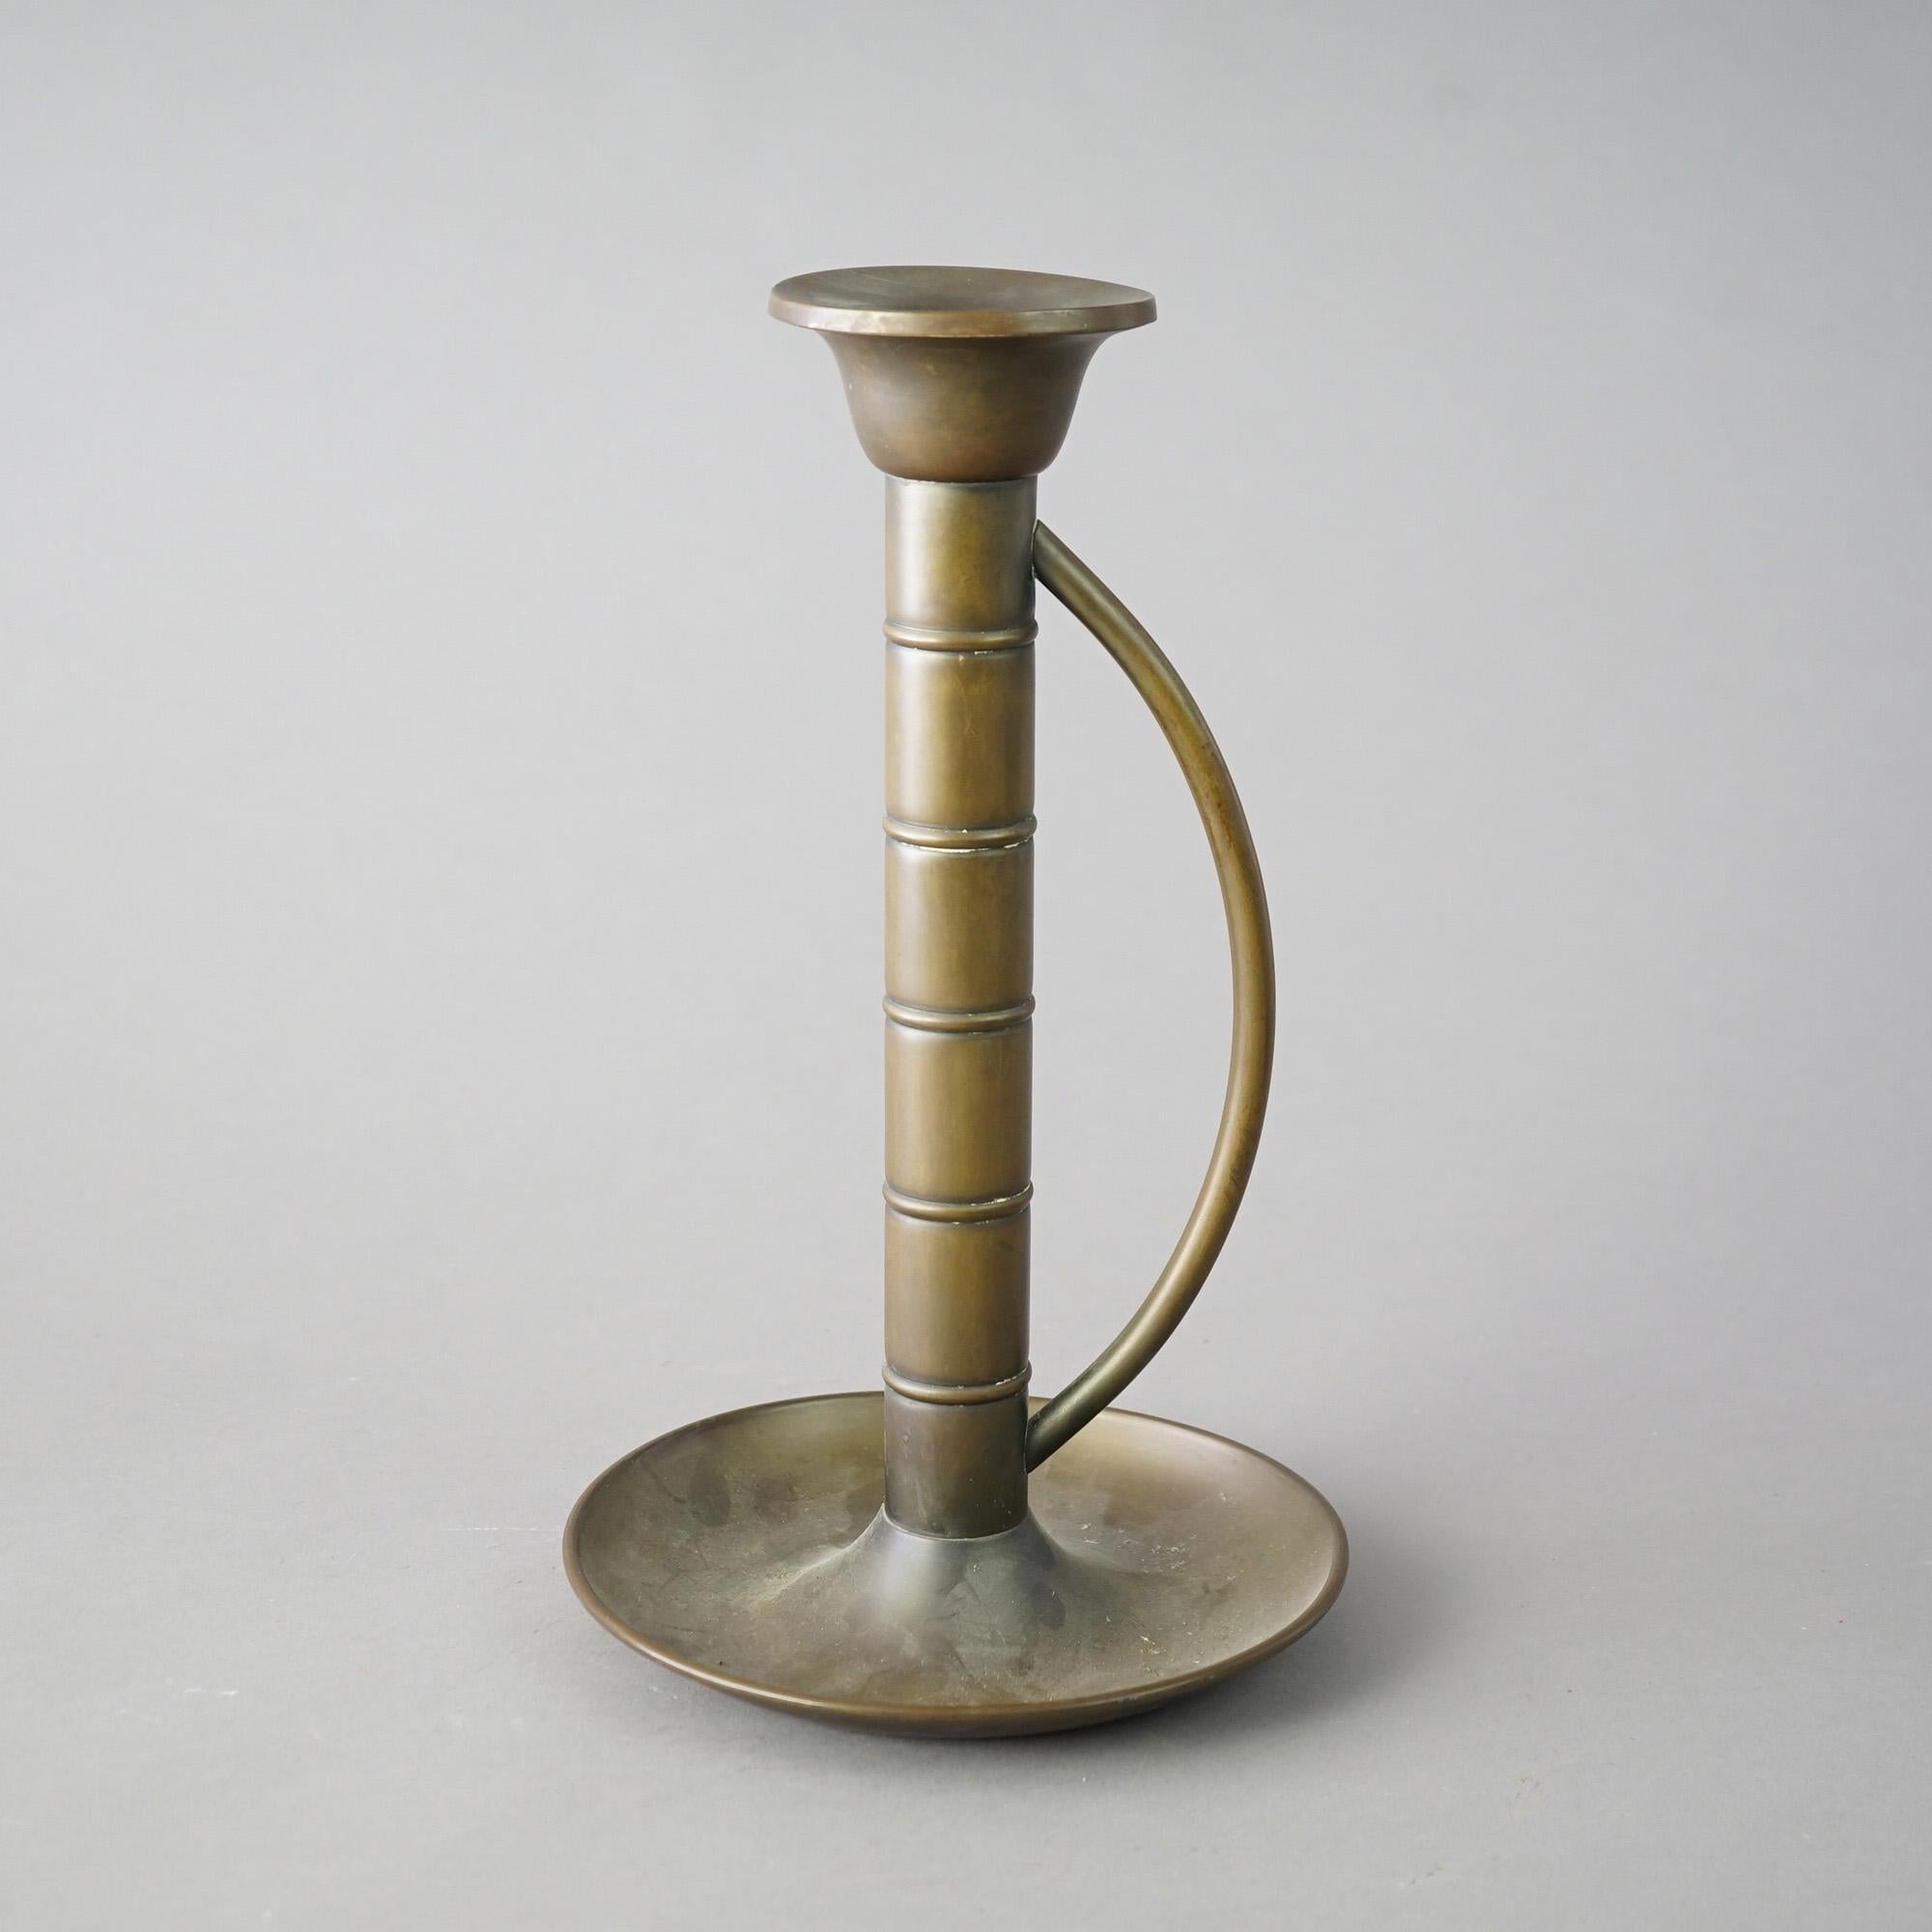 An antique oversized Mission style candle stick by Bradley And Hubbard, c1915

Measures - 14